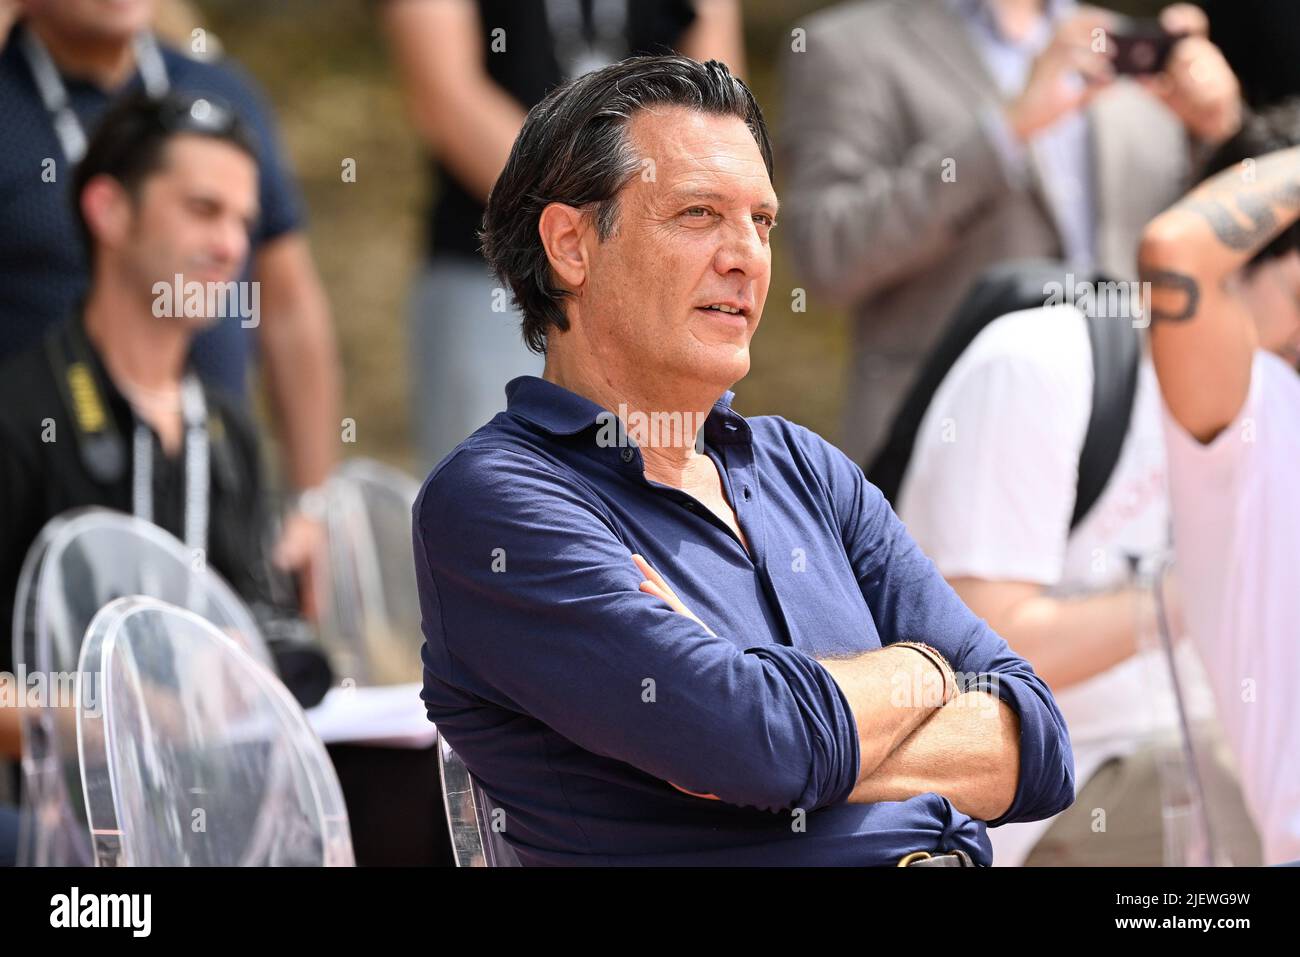 Rome, Italy, 28 June 2022, Diego Nepi Molineris is the general director of Sport and Salute during the presentation conference of the World Street Skateboarding Rome 2022 at the Parco del Colle Oppio in Rome on June 28, 2022 Stock Photo